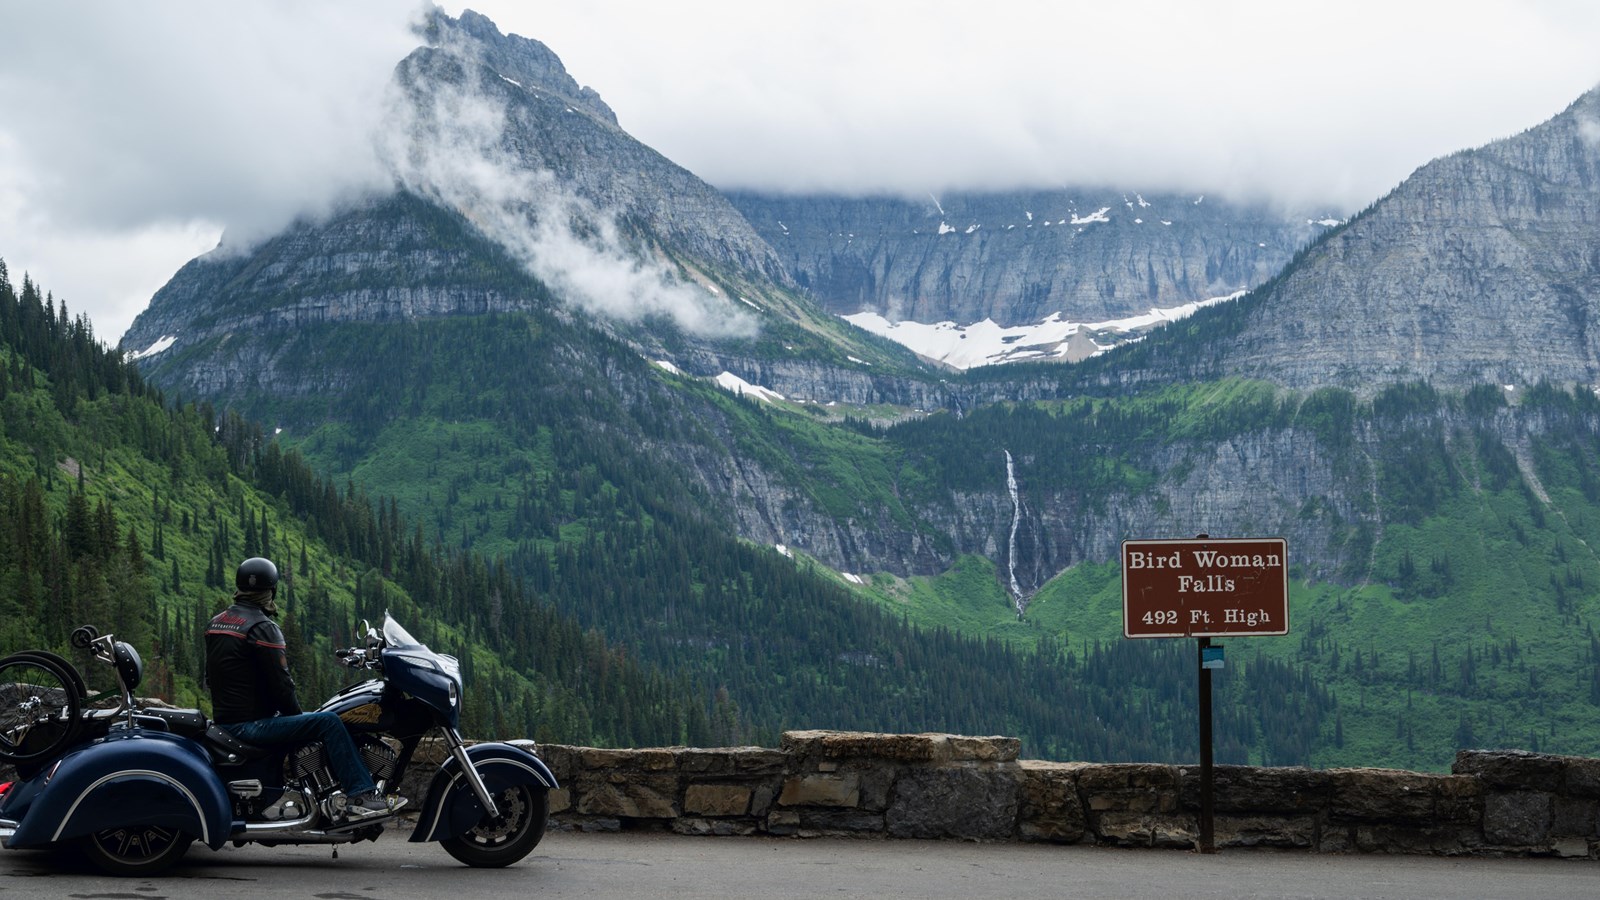 A motorcyclist marvels at the view from Bird Woman Falls Overlook